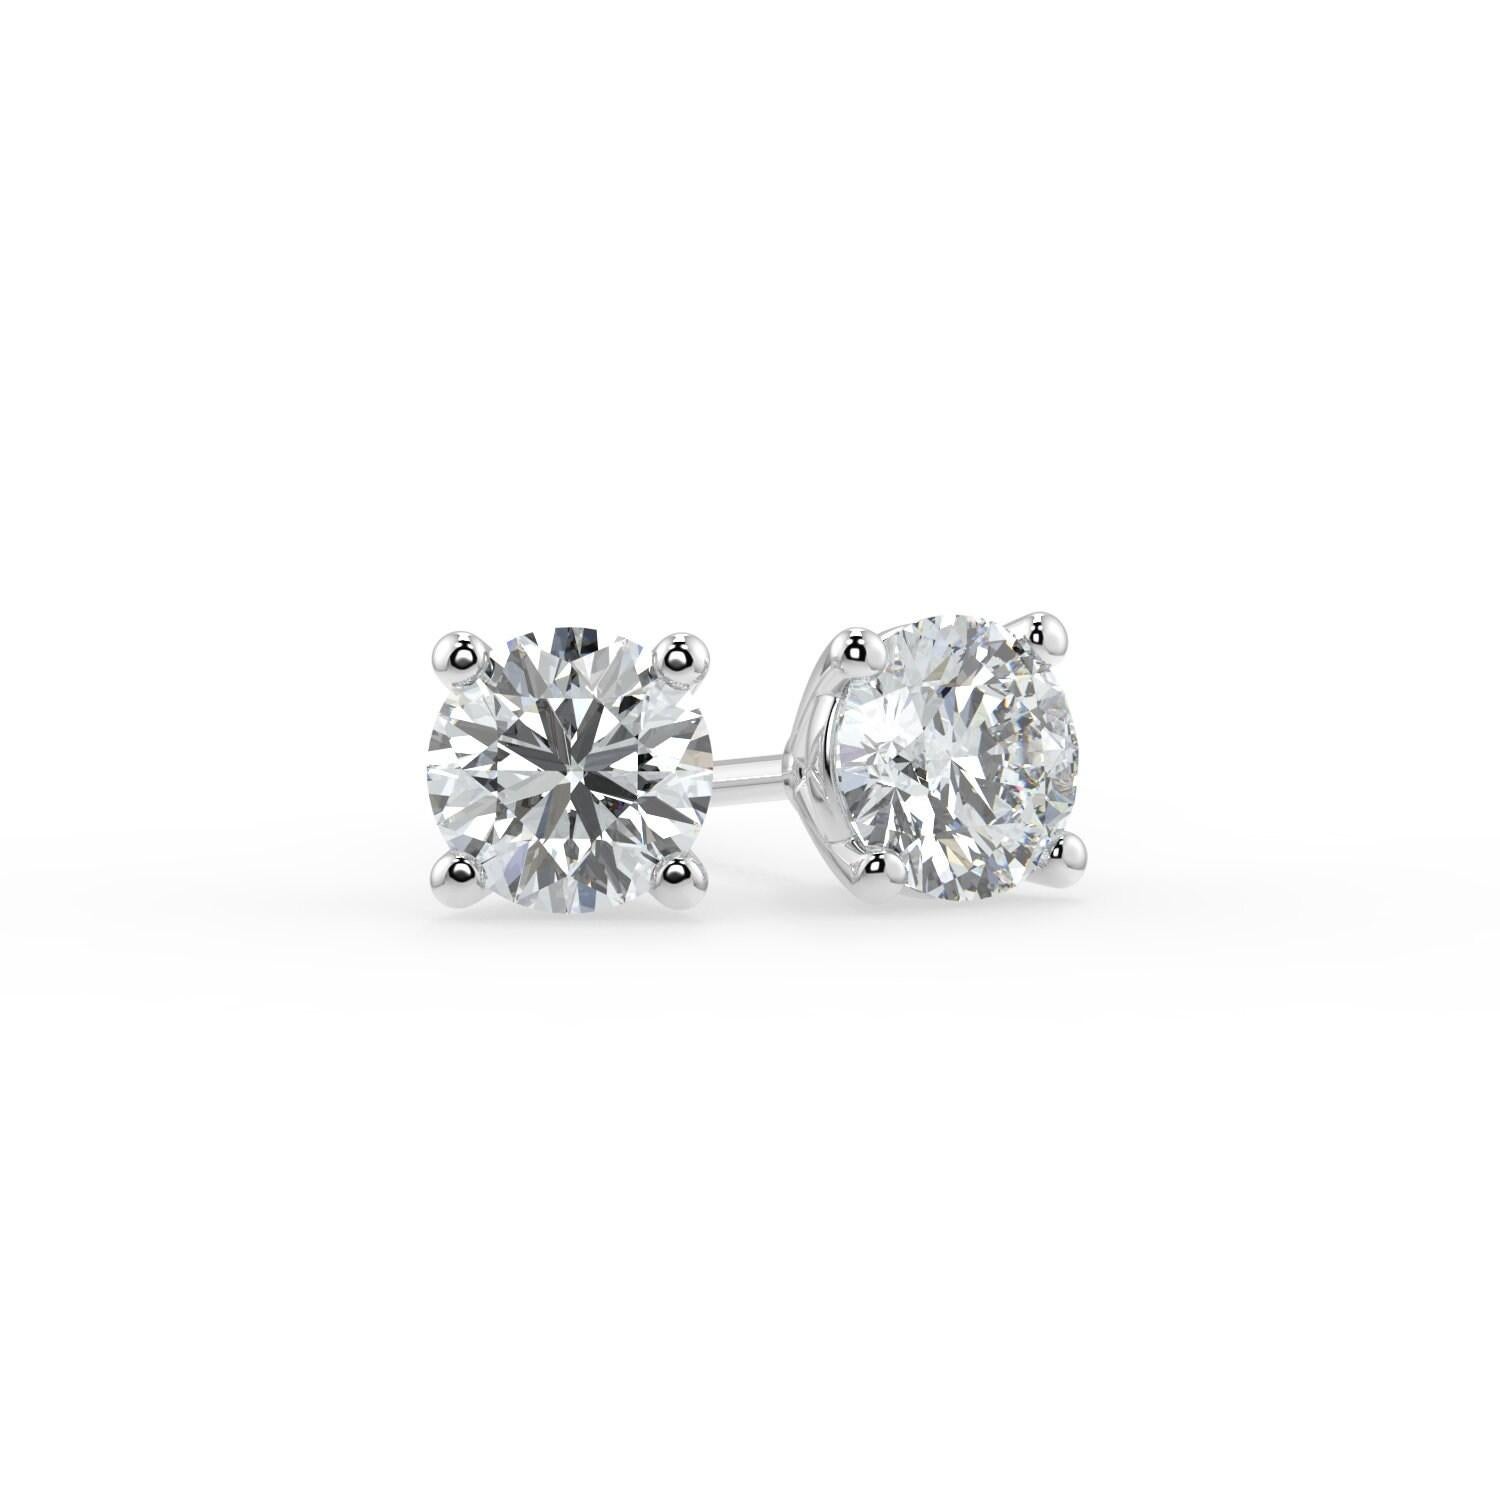 .25Ct Natural White Diamond  I1 Clarity Round Shape Solitaire 4 Prong Martini Style  Unisex Studs with Butterfly Pushbacks 14K White Gold 

Specifications:
Metal: 14k White Gold 
Diamond Shape: Round
Natural Diamond carat weight: 0.25 CTW 
Diamond